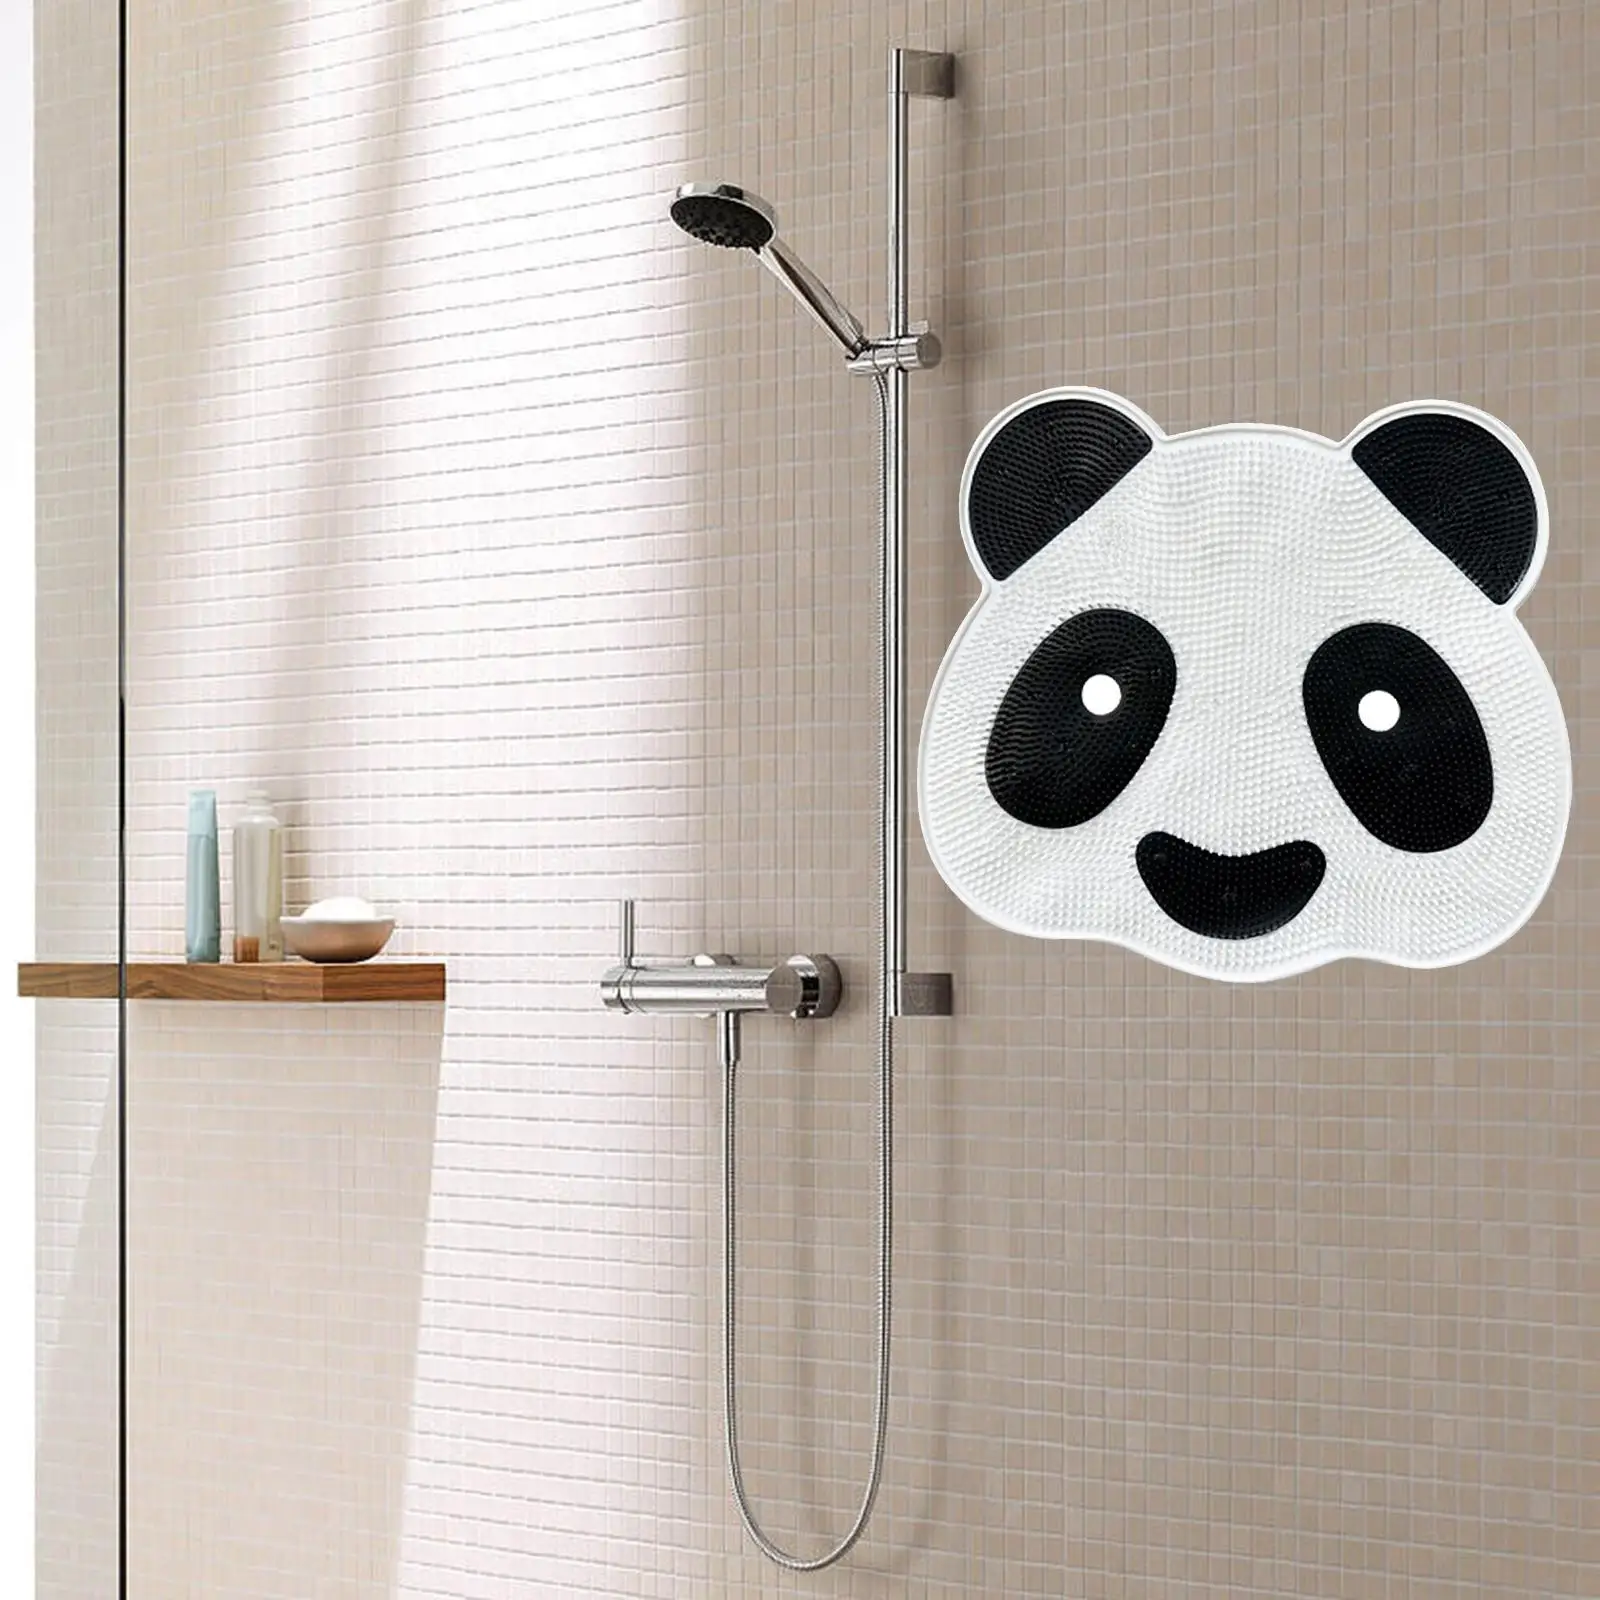 Shower Foot and Back Scrubber with Suction Cups Foot Cleaner Big Cute Panda Shape Wall Mounted Back Scrubber for Men and Women